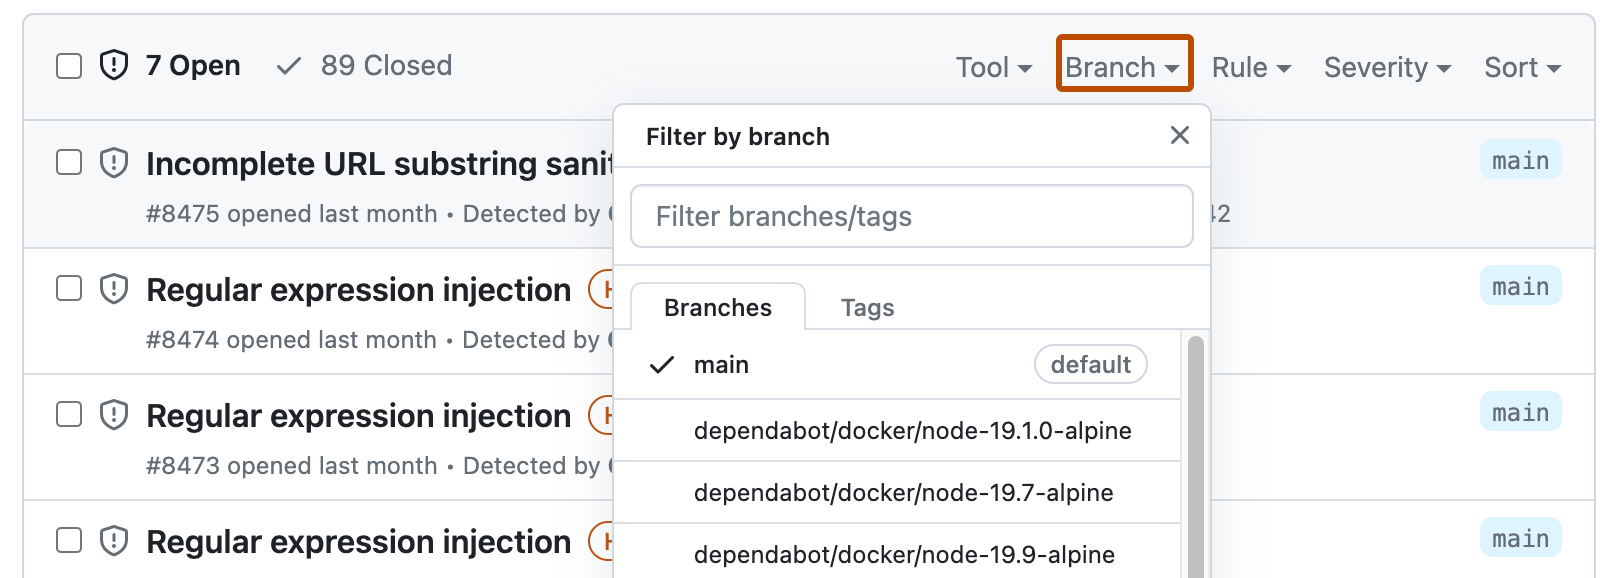 Screenshot of the search field on the code scanning, with the "Branch" dropdown menu expanded. The "Branch" button is outlined in dark orange.